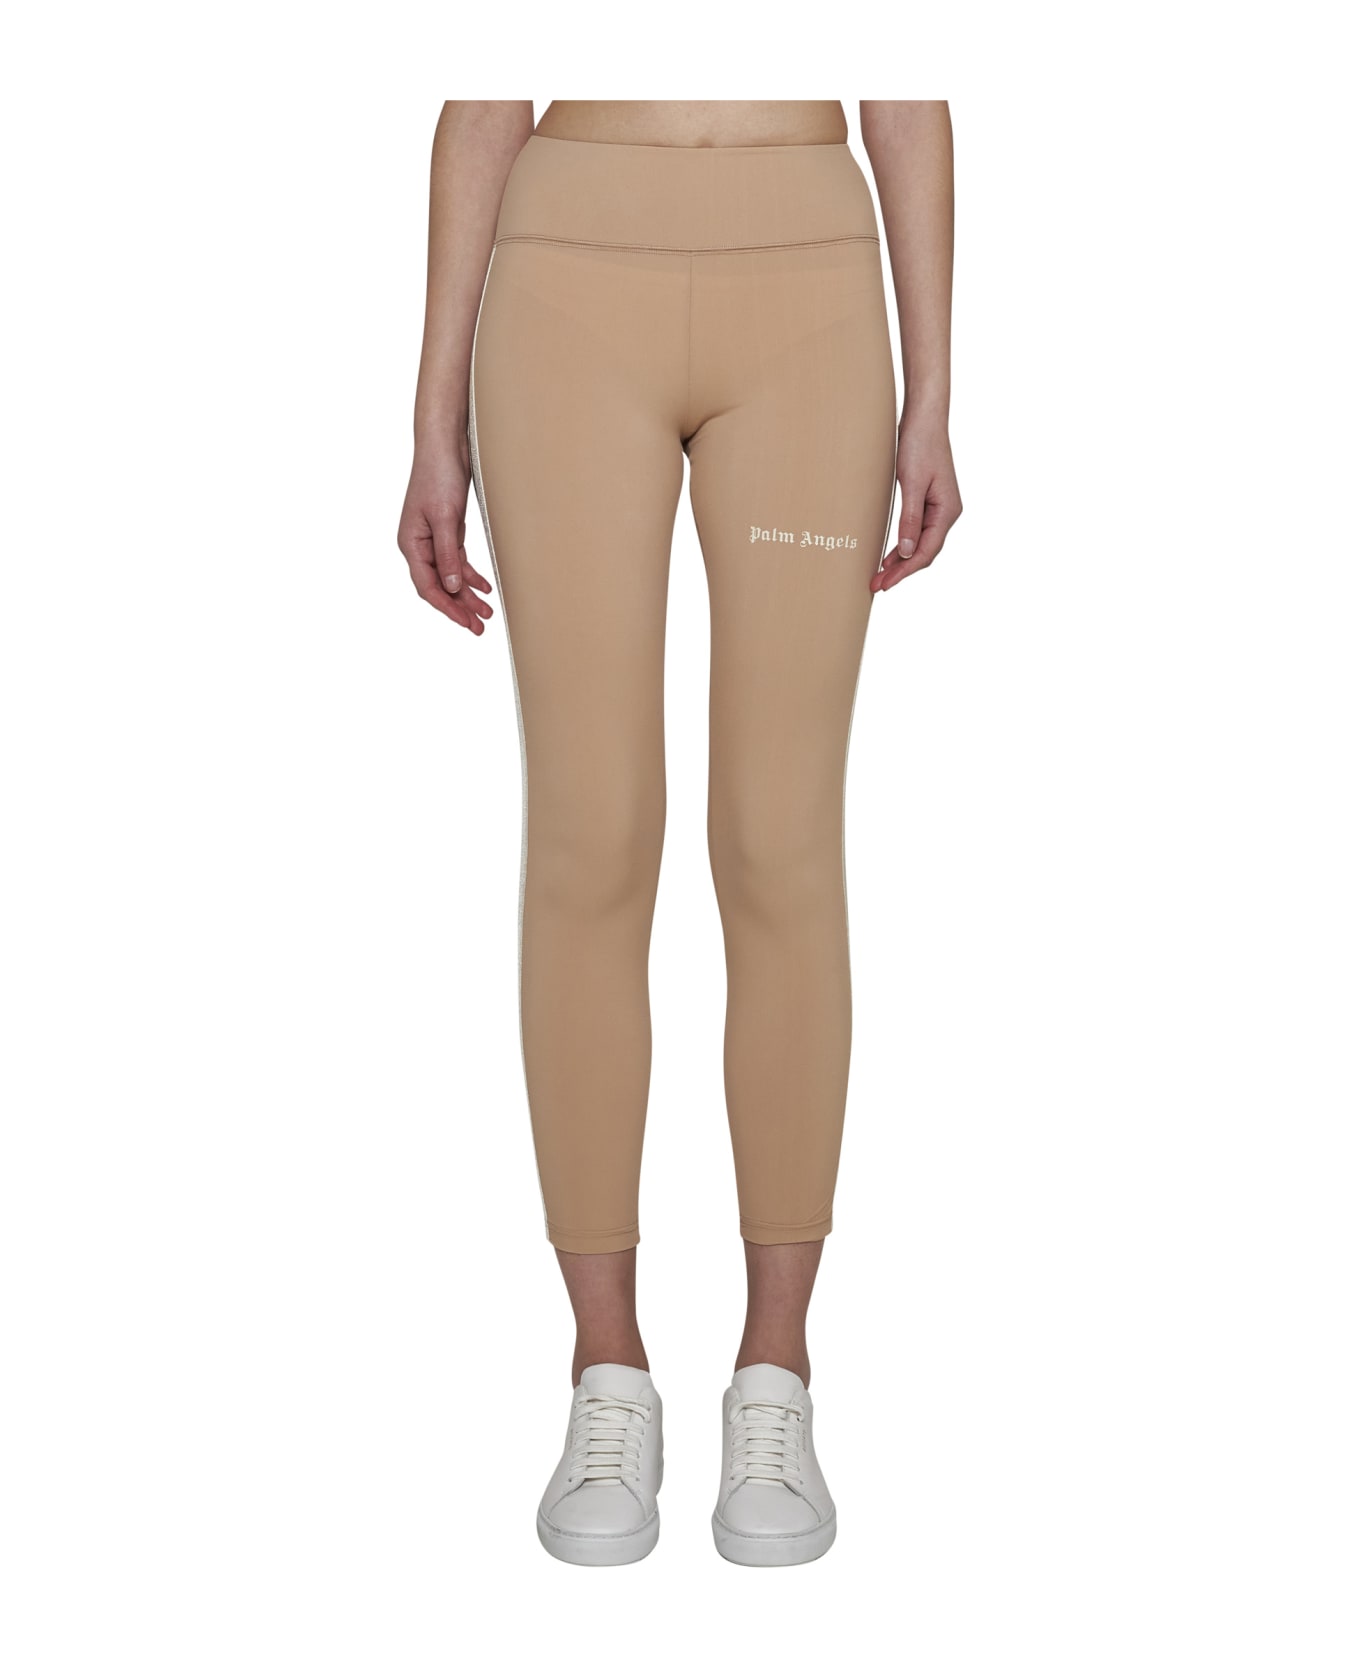 Palm Angels Pants - Nude off white